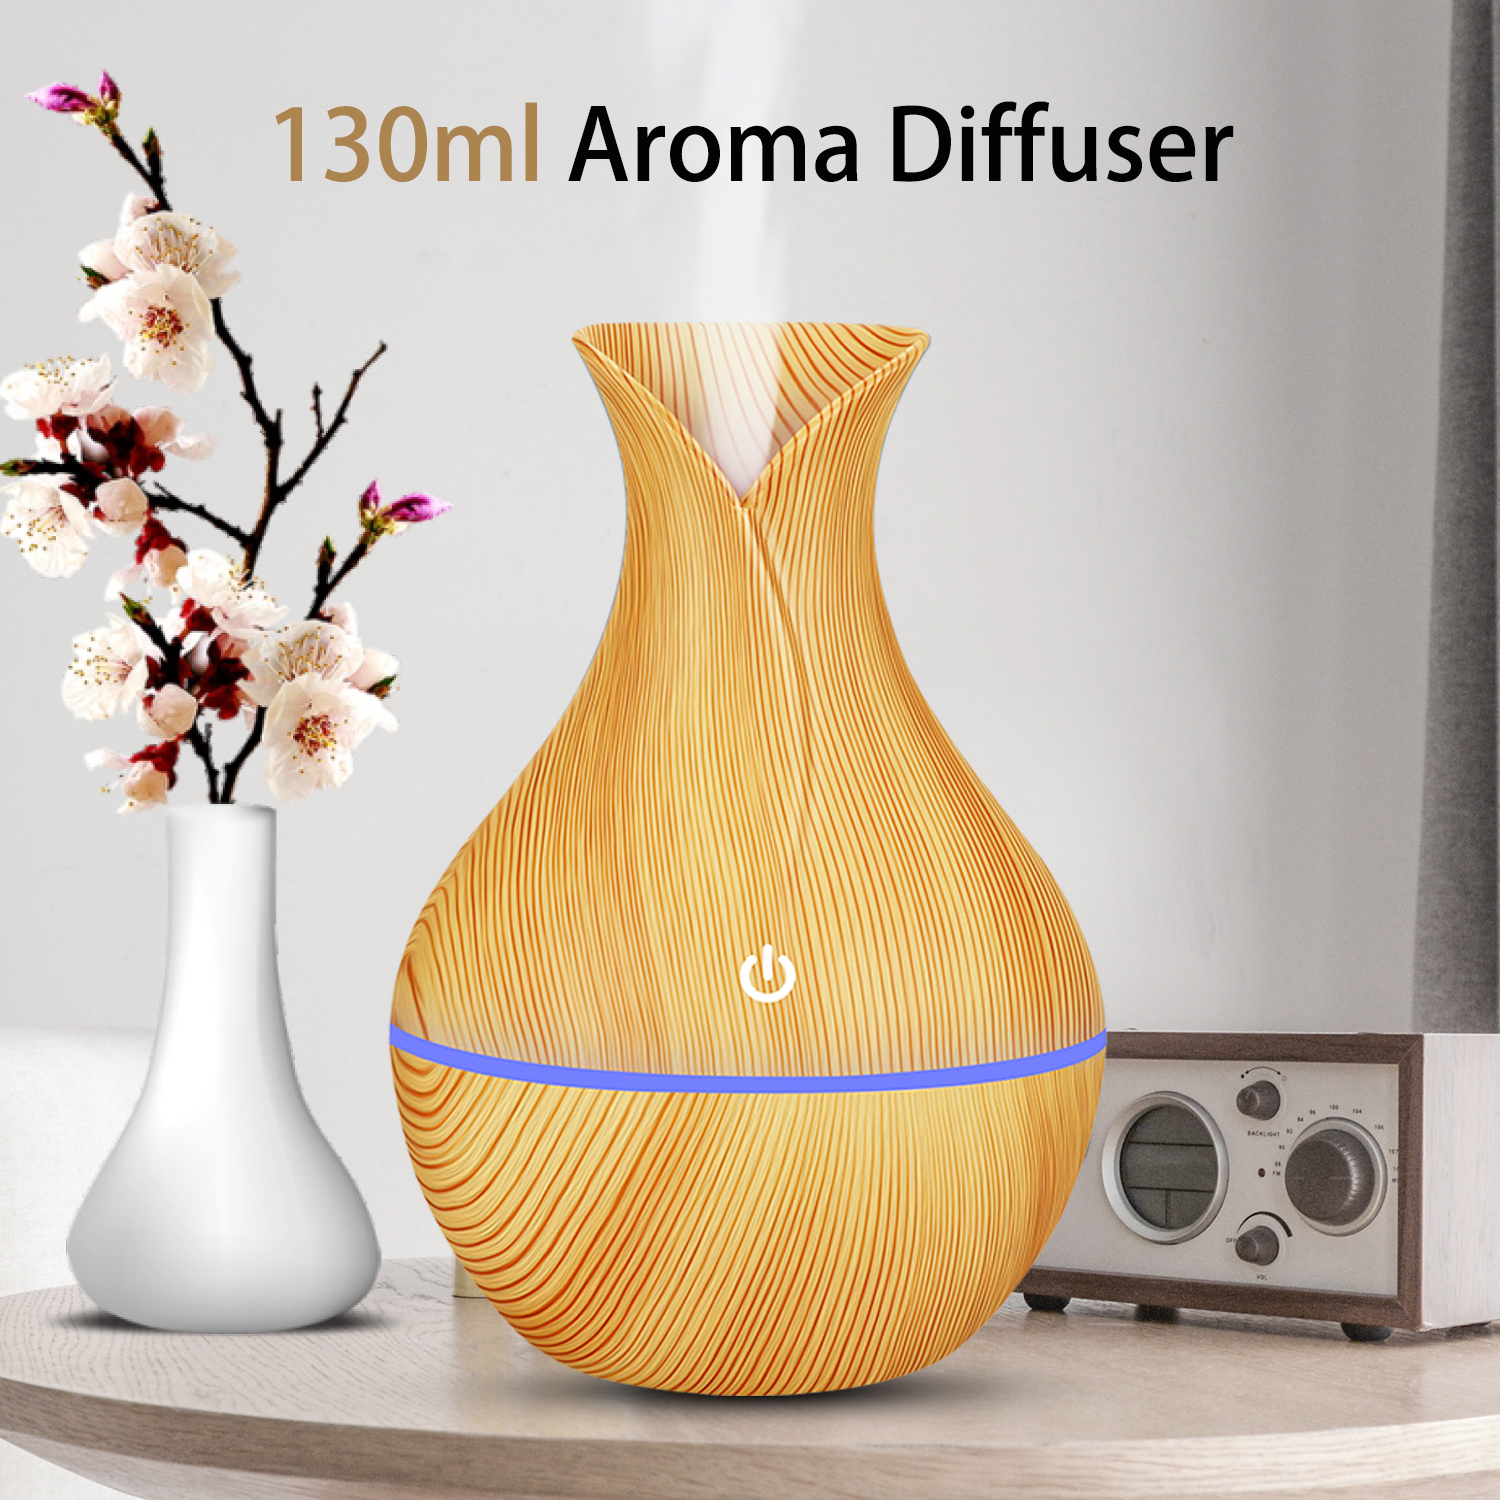 Luchtbevochtiger Usb Aroma Essentiële Olie Diffuser Ultrasone Cool Mist Luchtreiniger 7 Color Change Led Night Light Voor Office Home